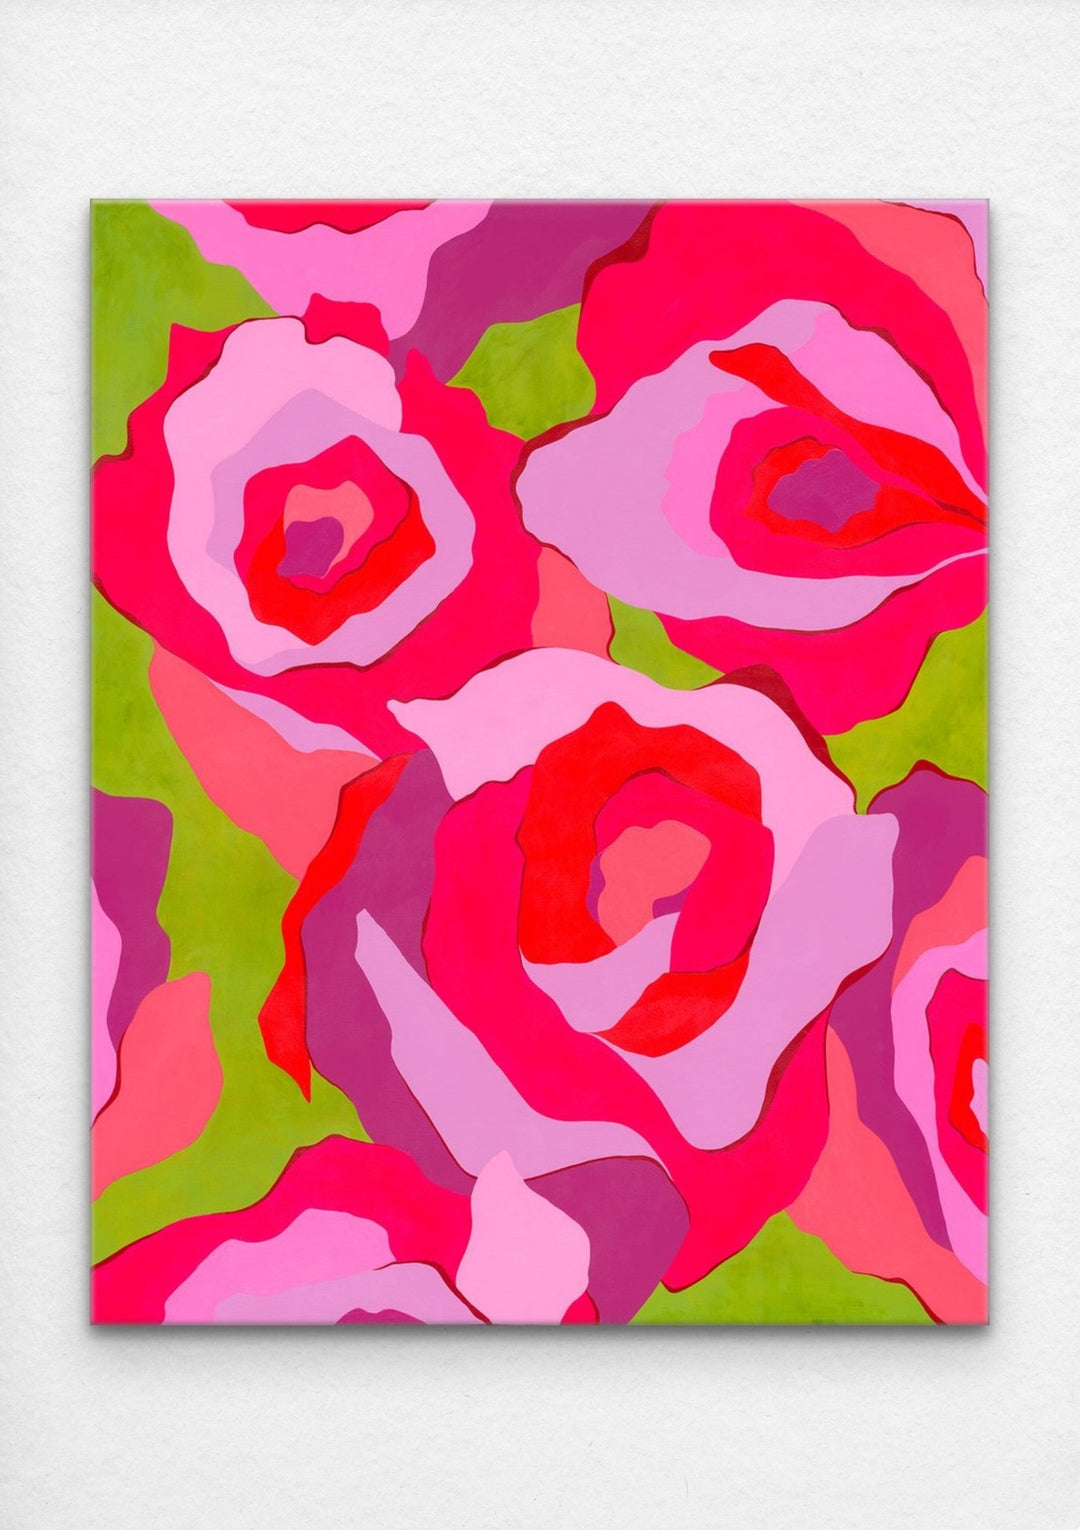 abstract rose painting